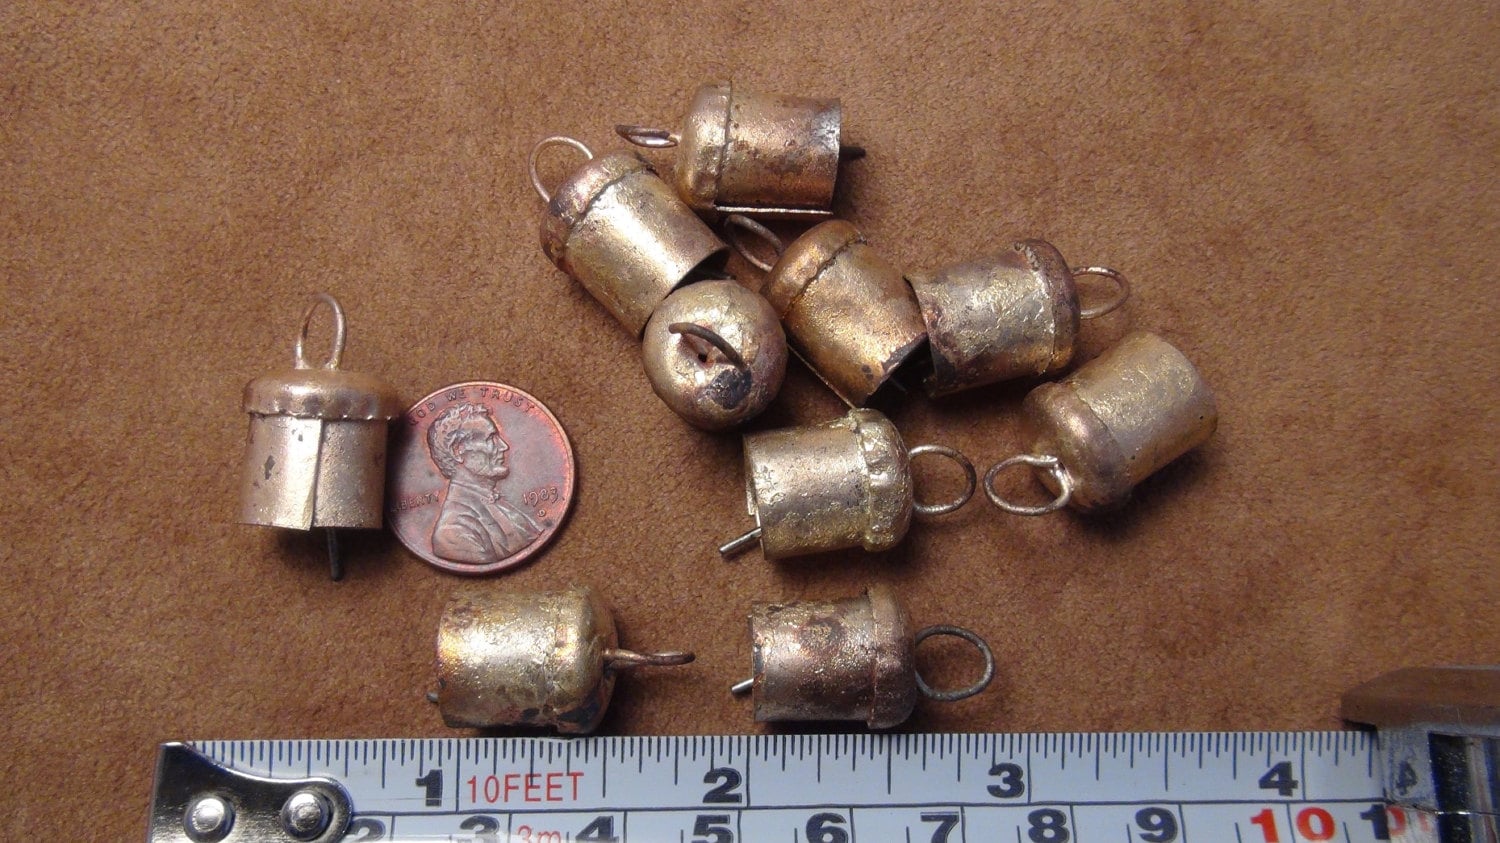 TINY Bells-10 COPPER Painted Iron Tinkling Tiny Cylindrical Bells